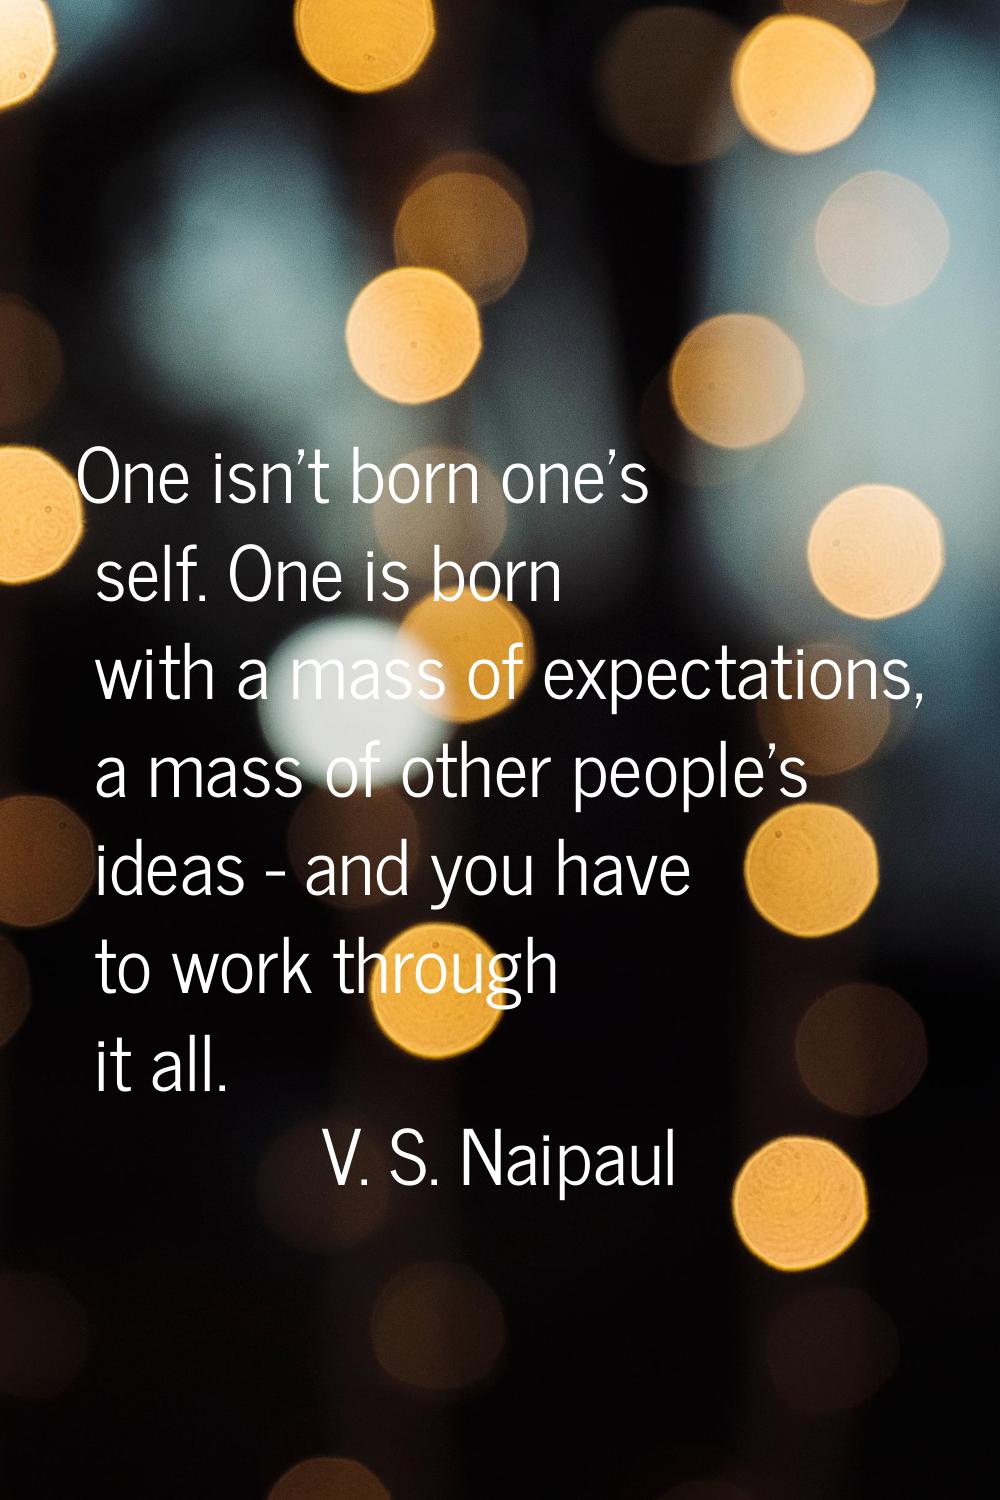 One isn't born one's self. One is born with a mass of expectations, a mass of other people's ideas 